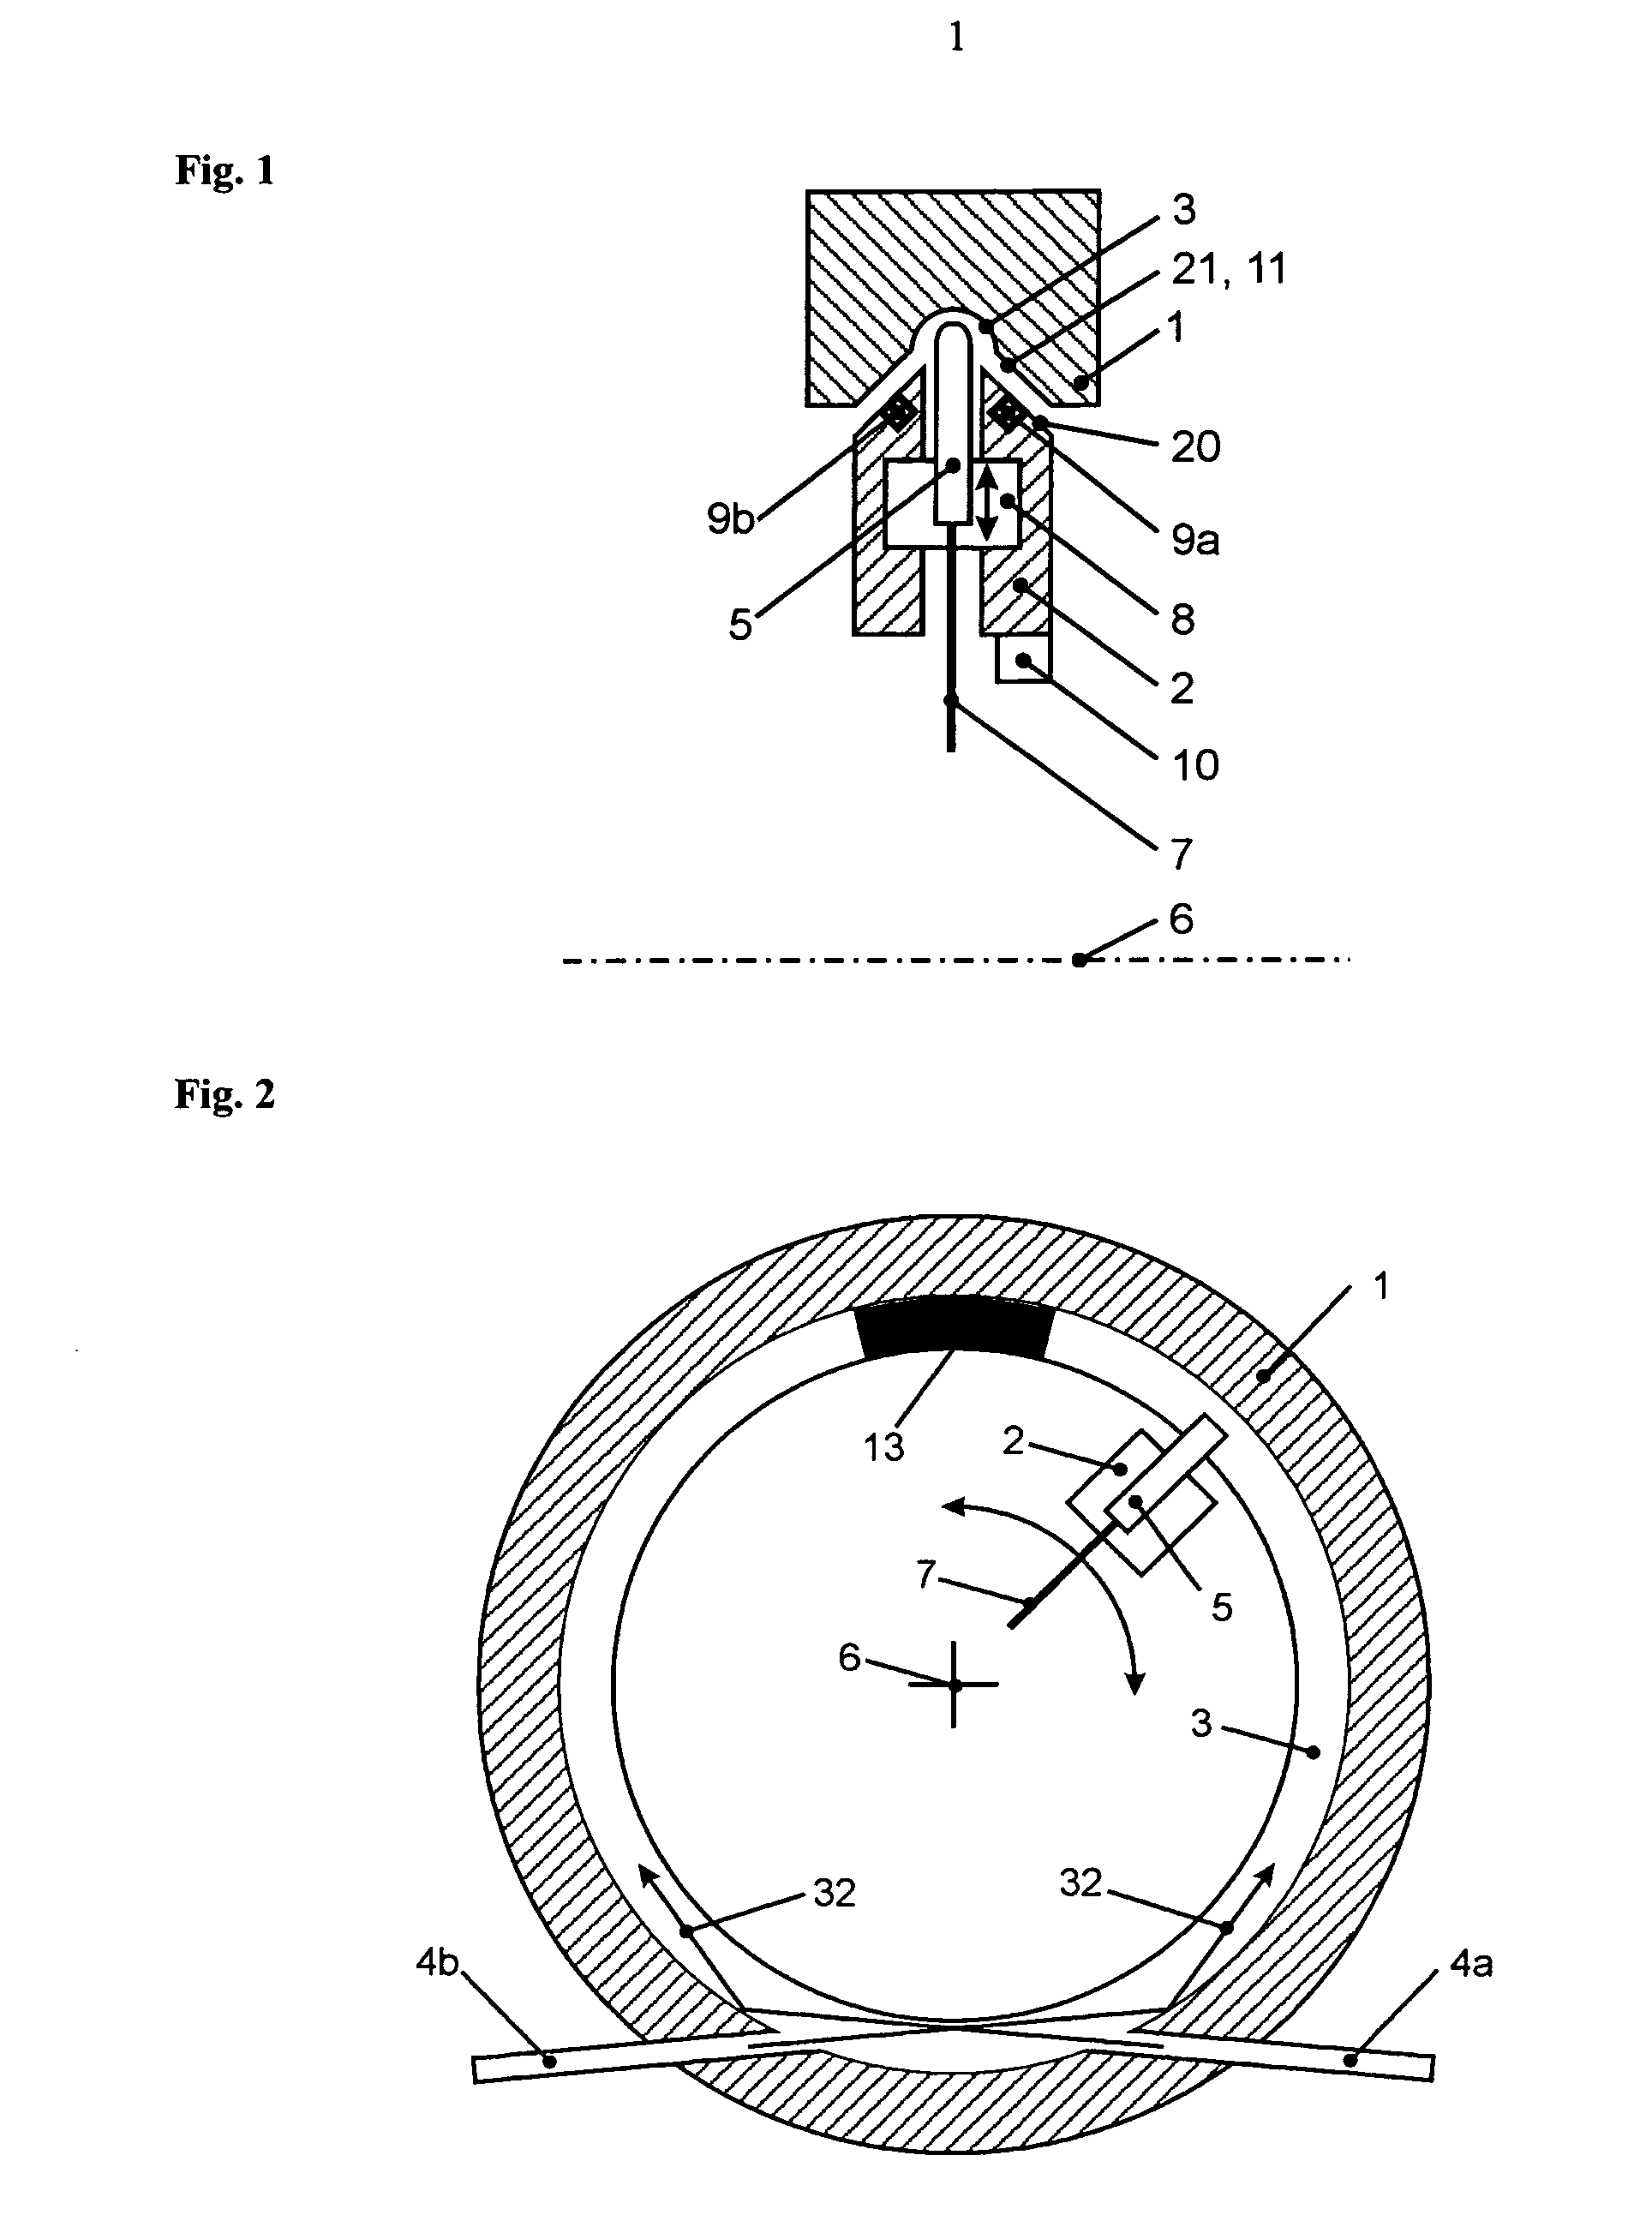 Optical rotating data transmission device having an unobstructed inner diameter